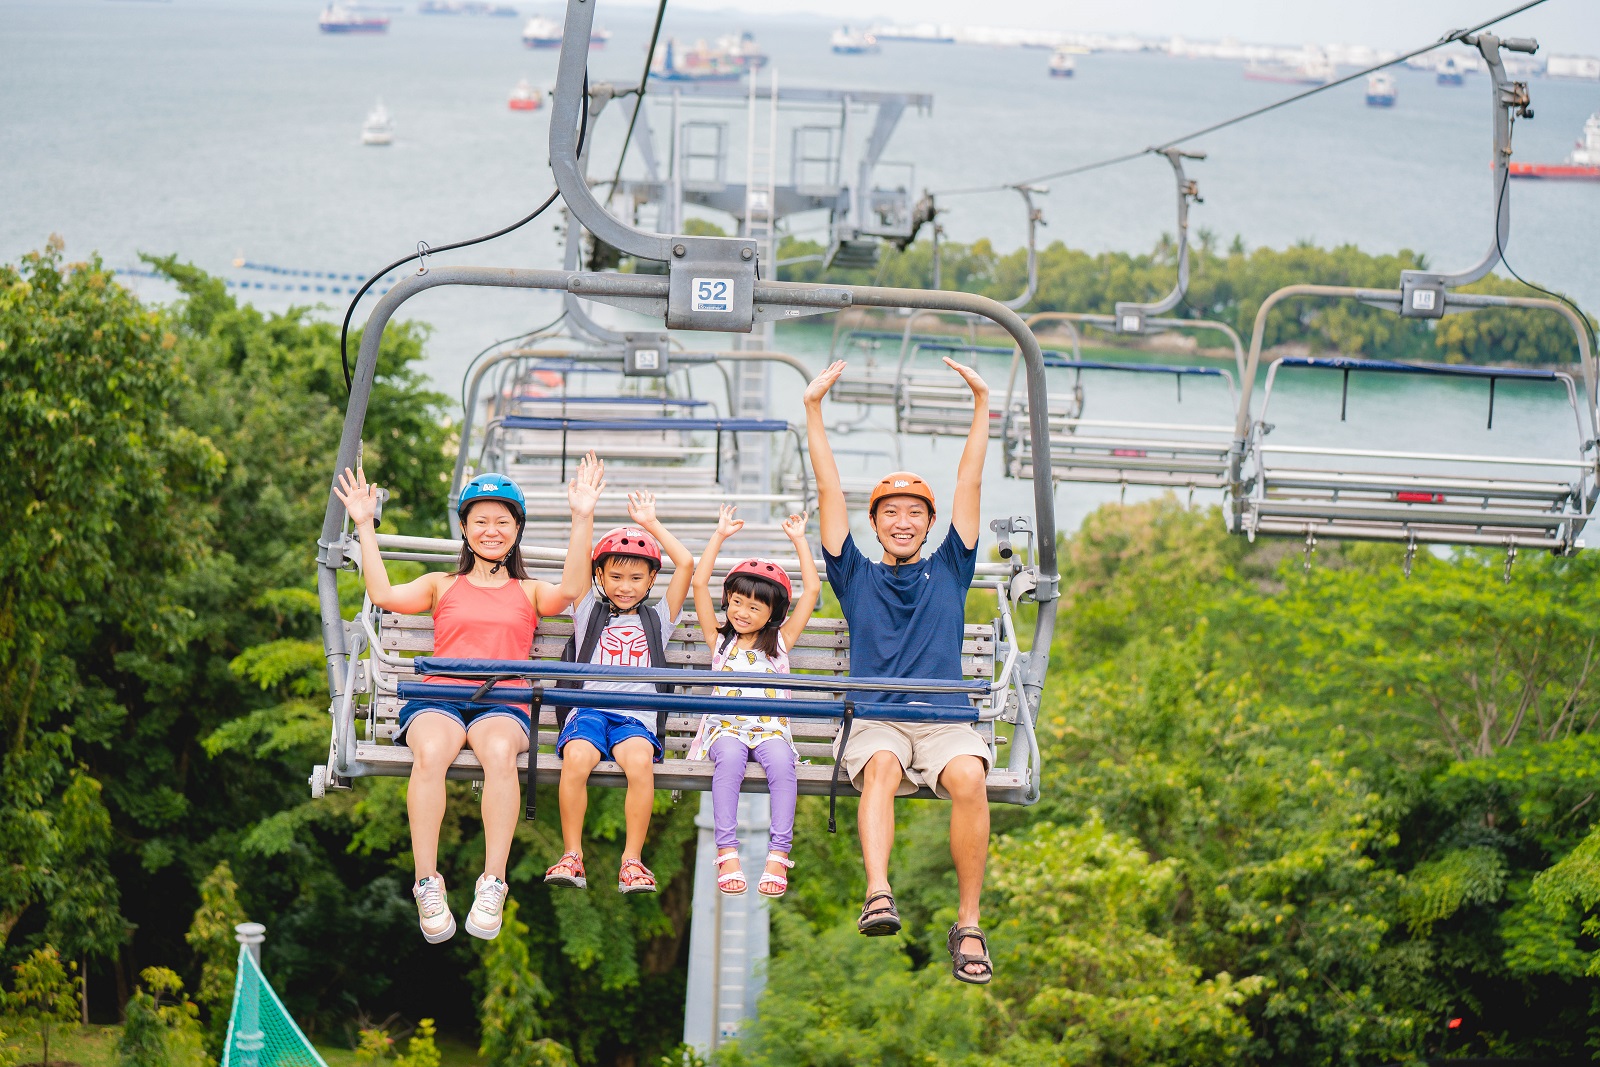 How To Get To Luge Sentosa